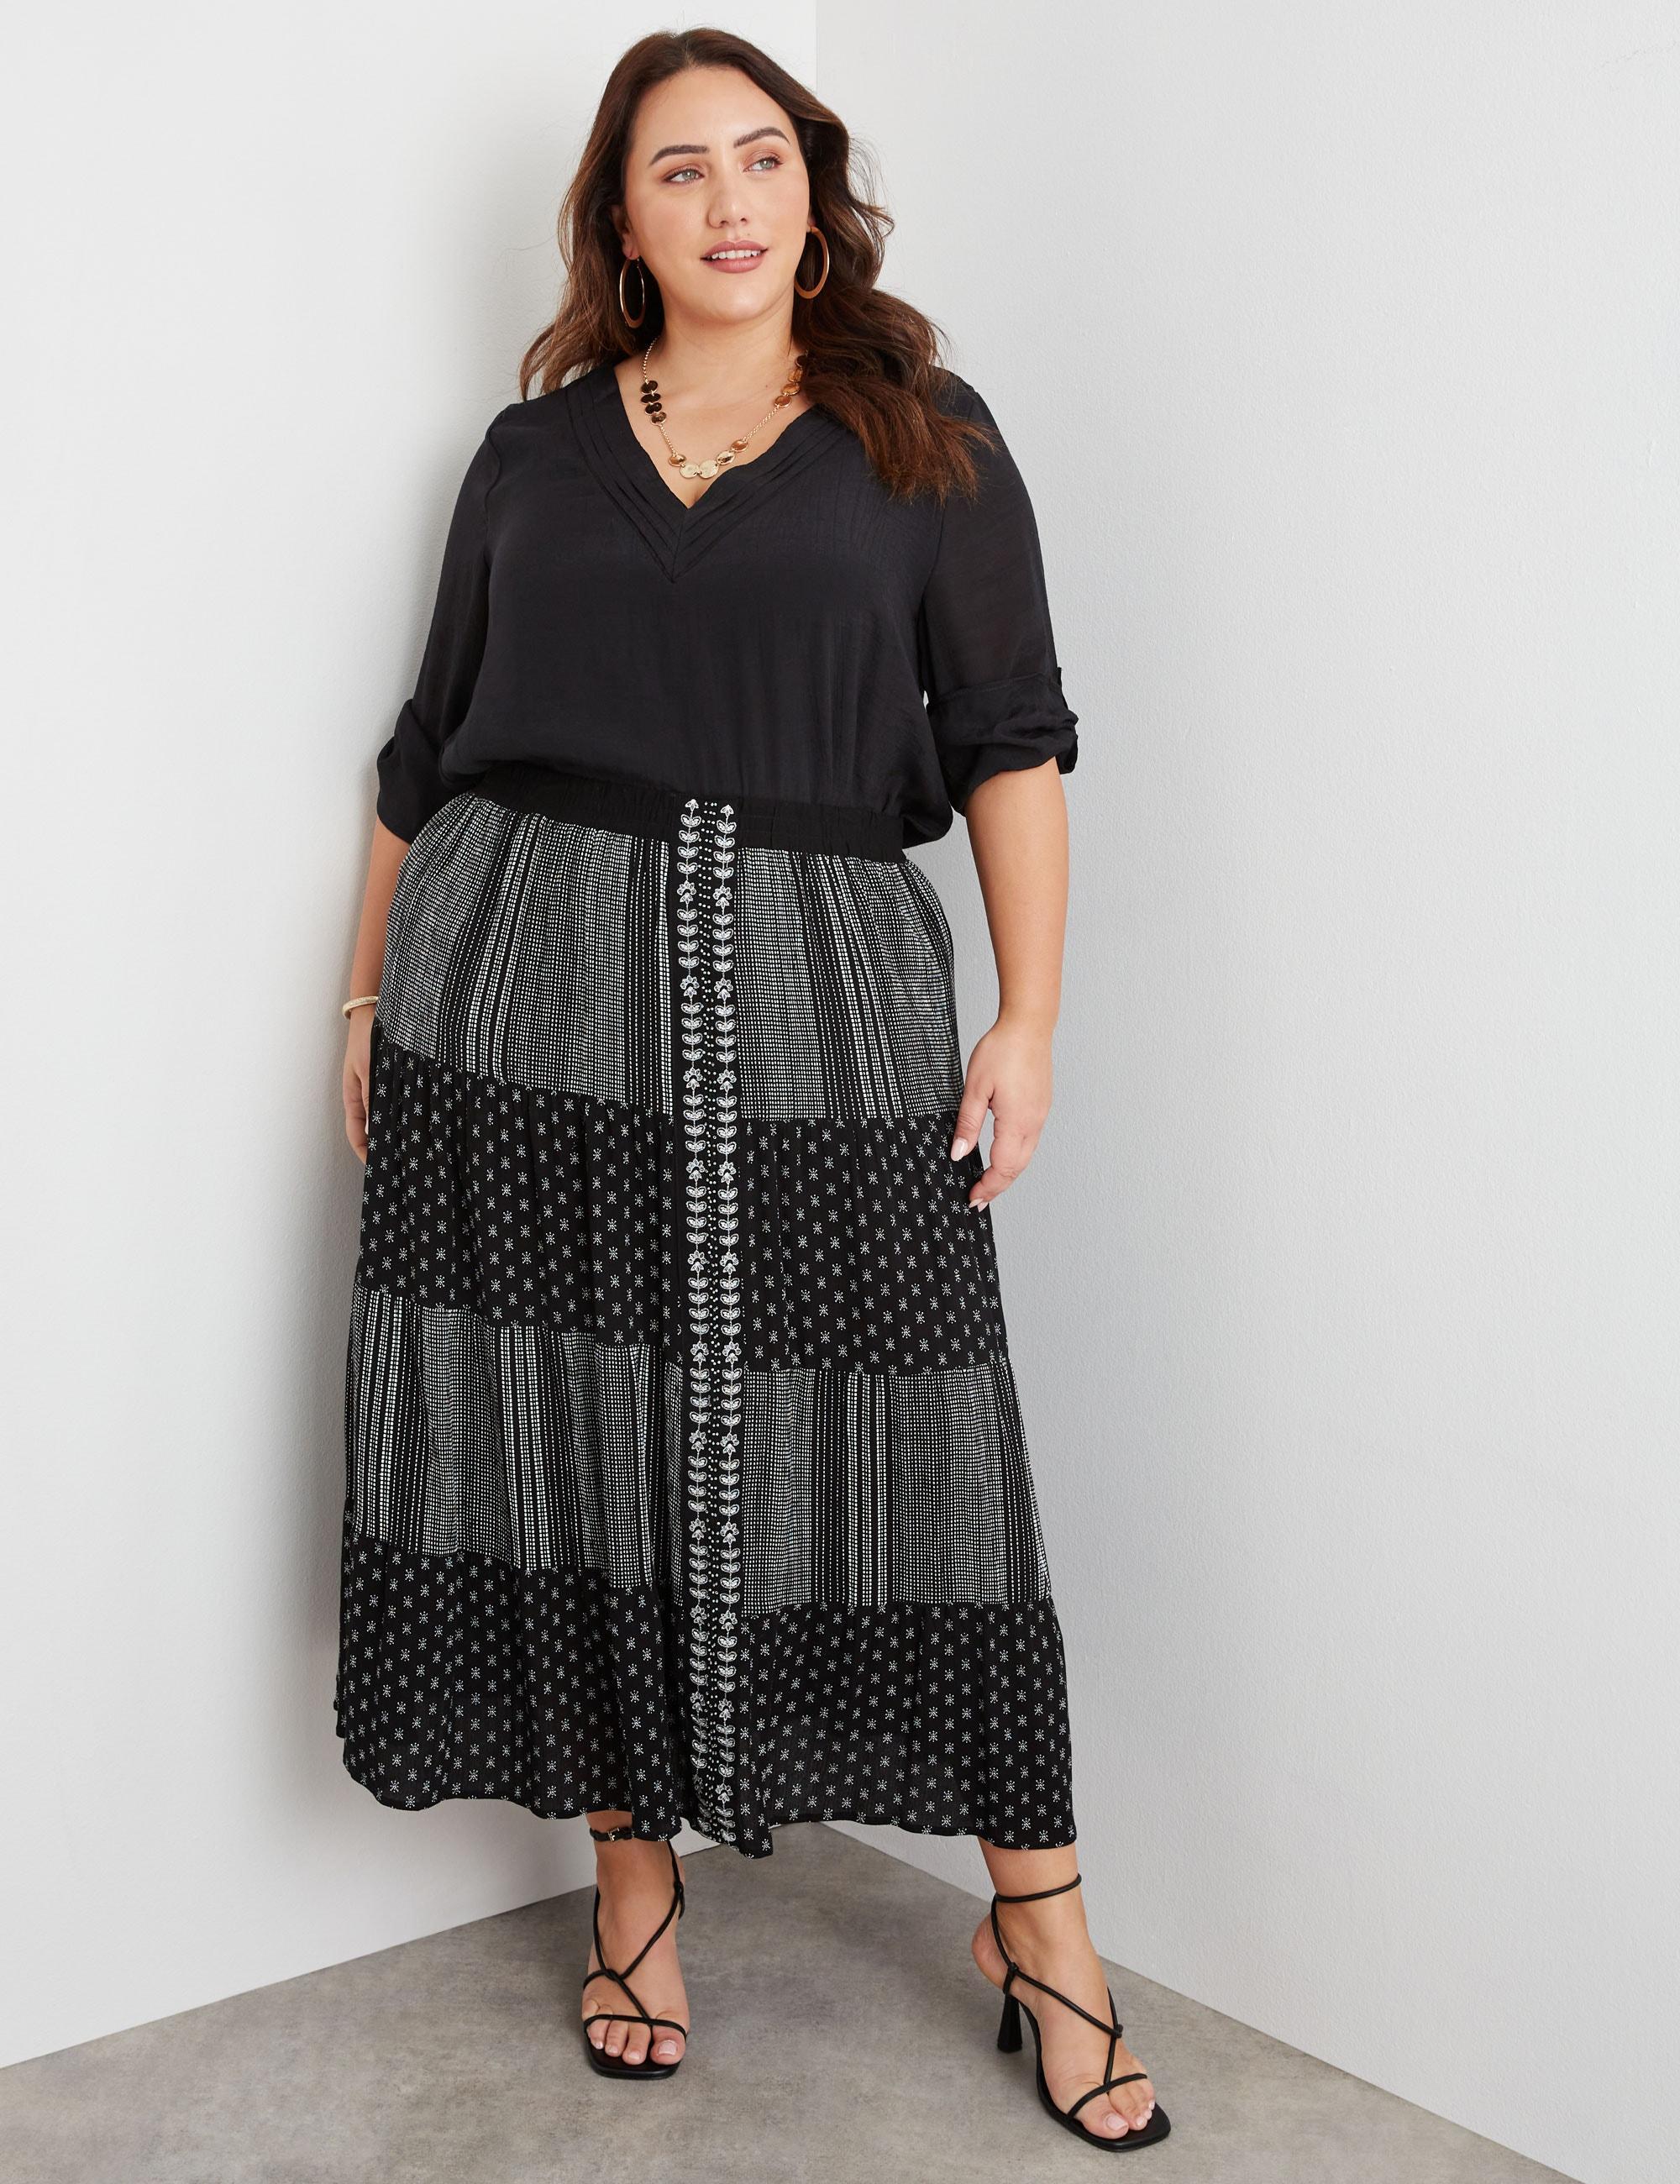 BeMe - Plus Size - Womens Skirts - Maxi - Summer - Beige - A Line - Work Clothes - Multi - Oversized - Woven - Tiered Beaded - Knee Length - Fashion